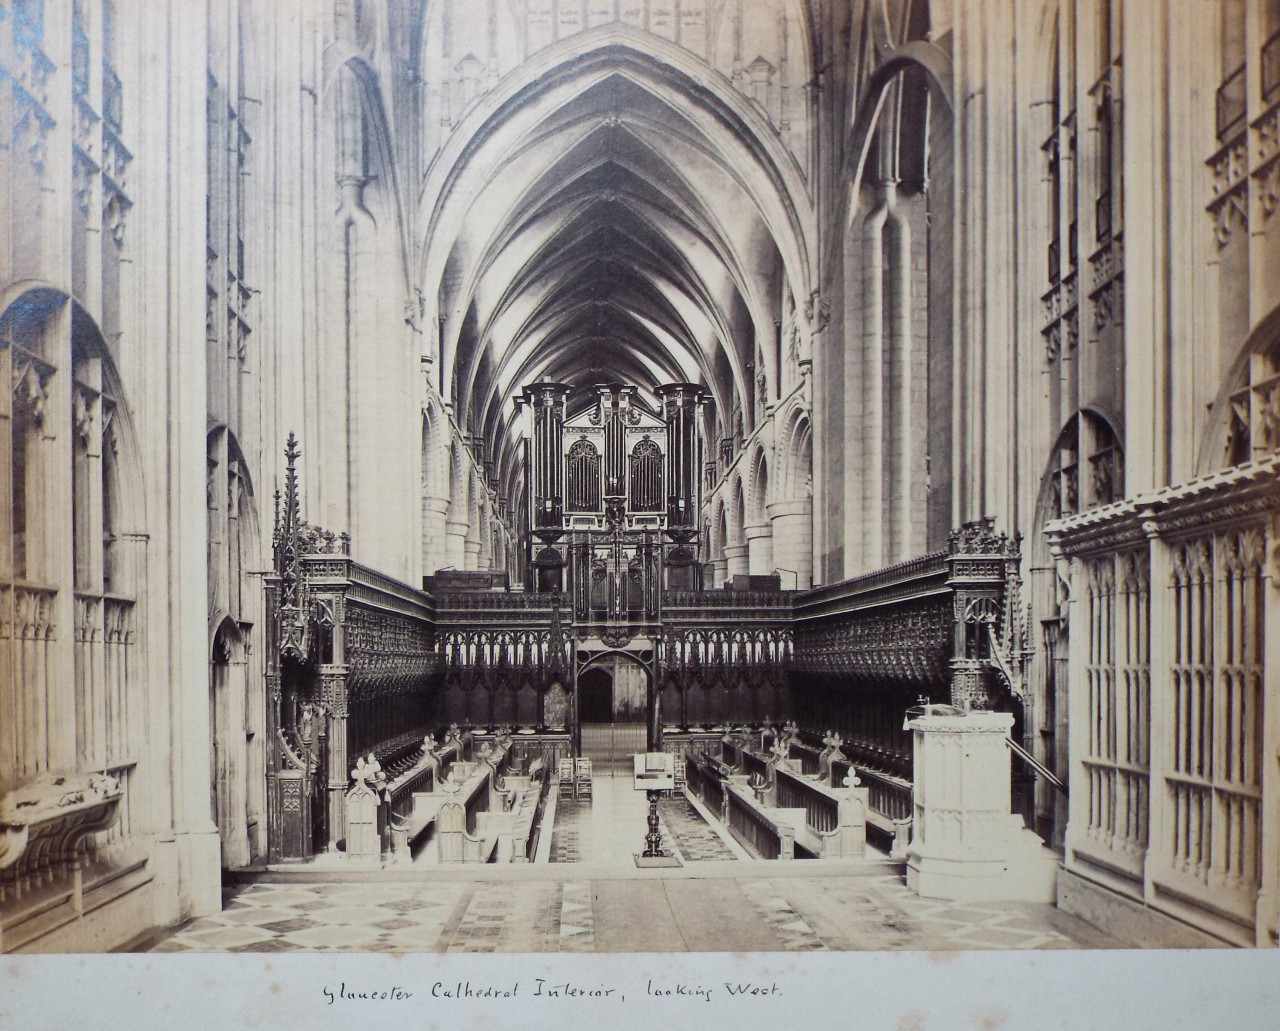 Photograph - Gloucester Cathedral Interior, looking West